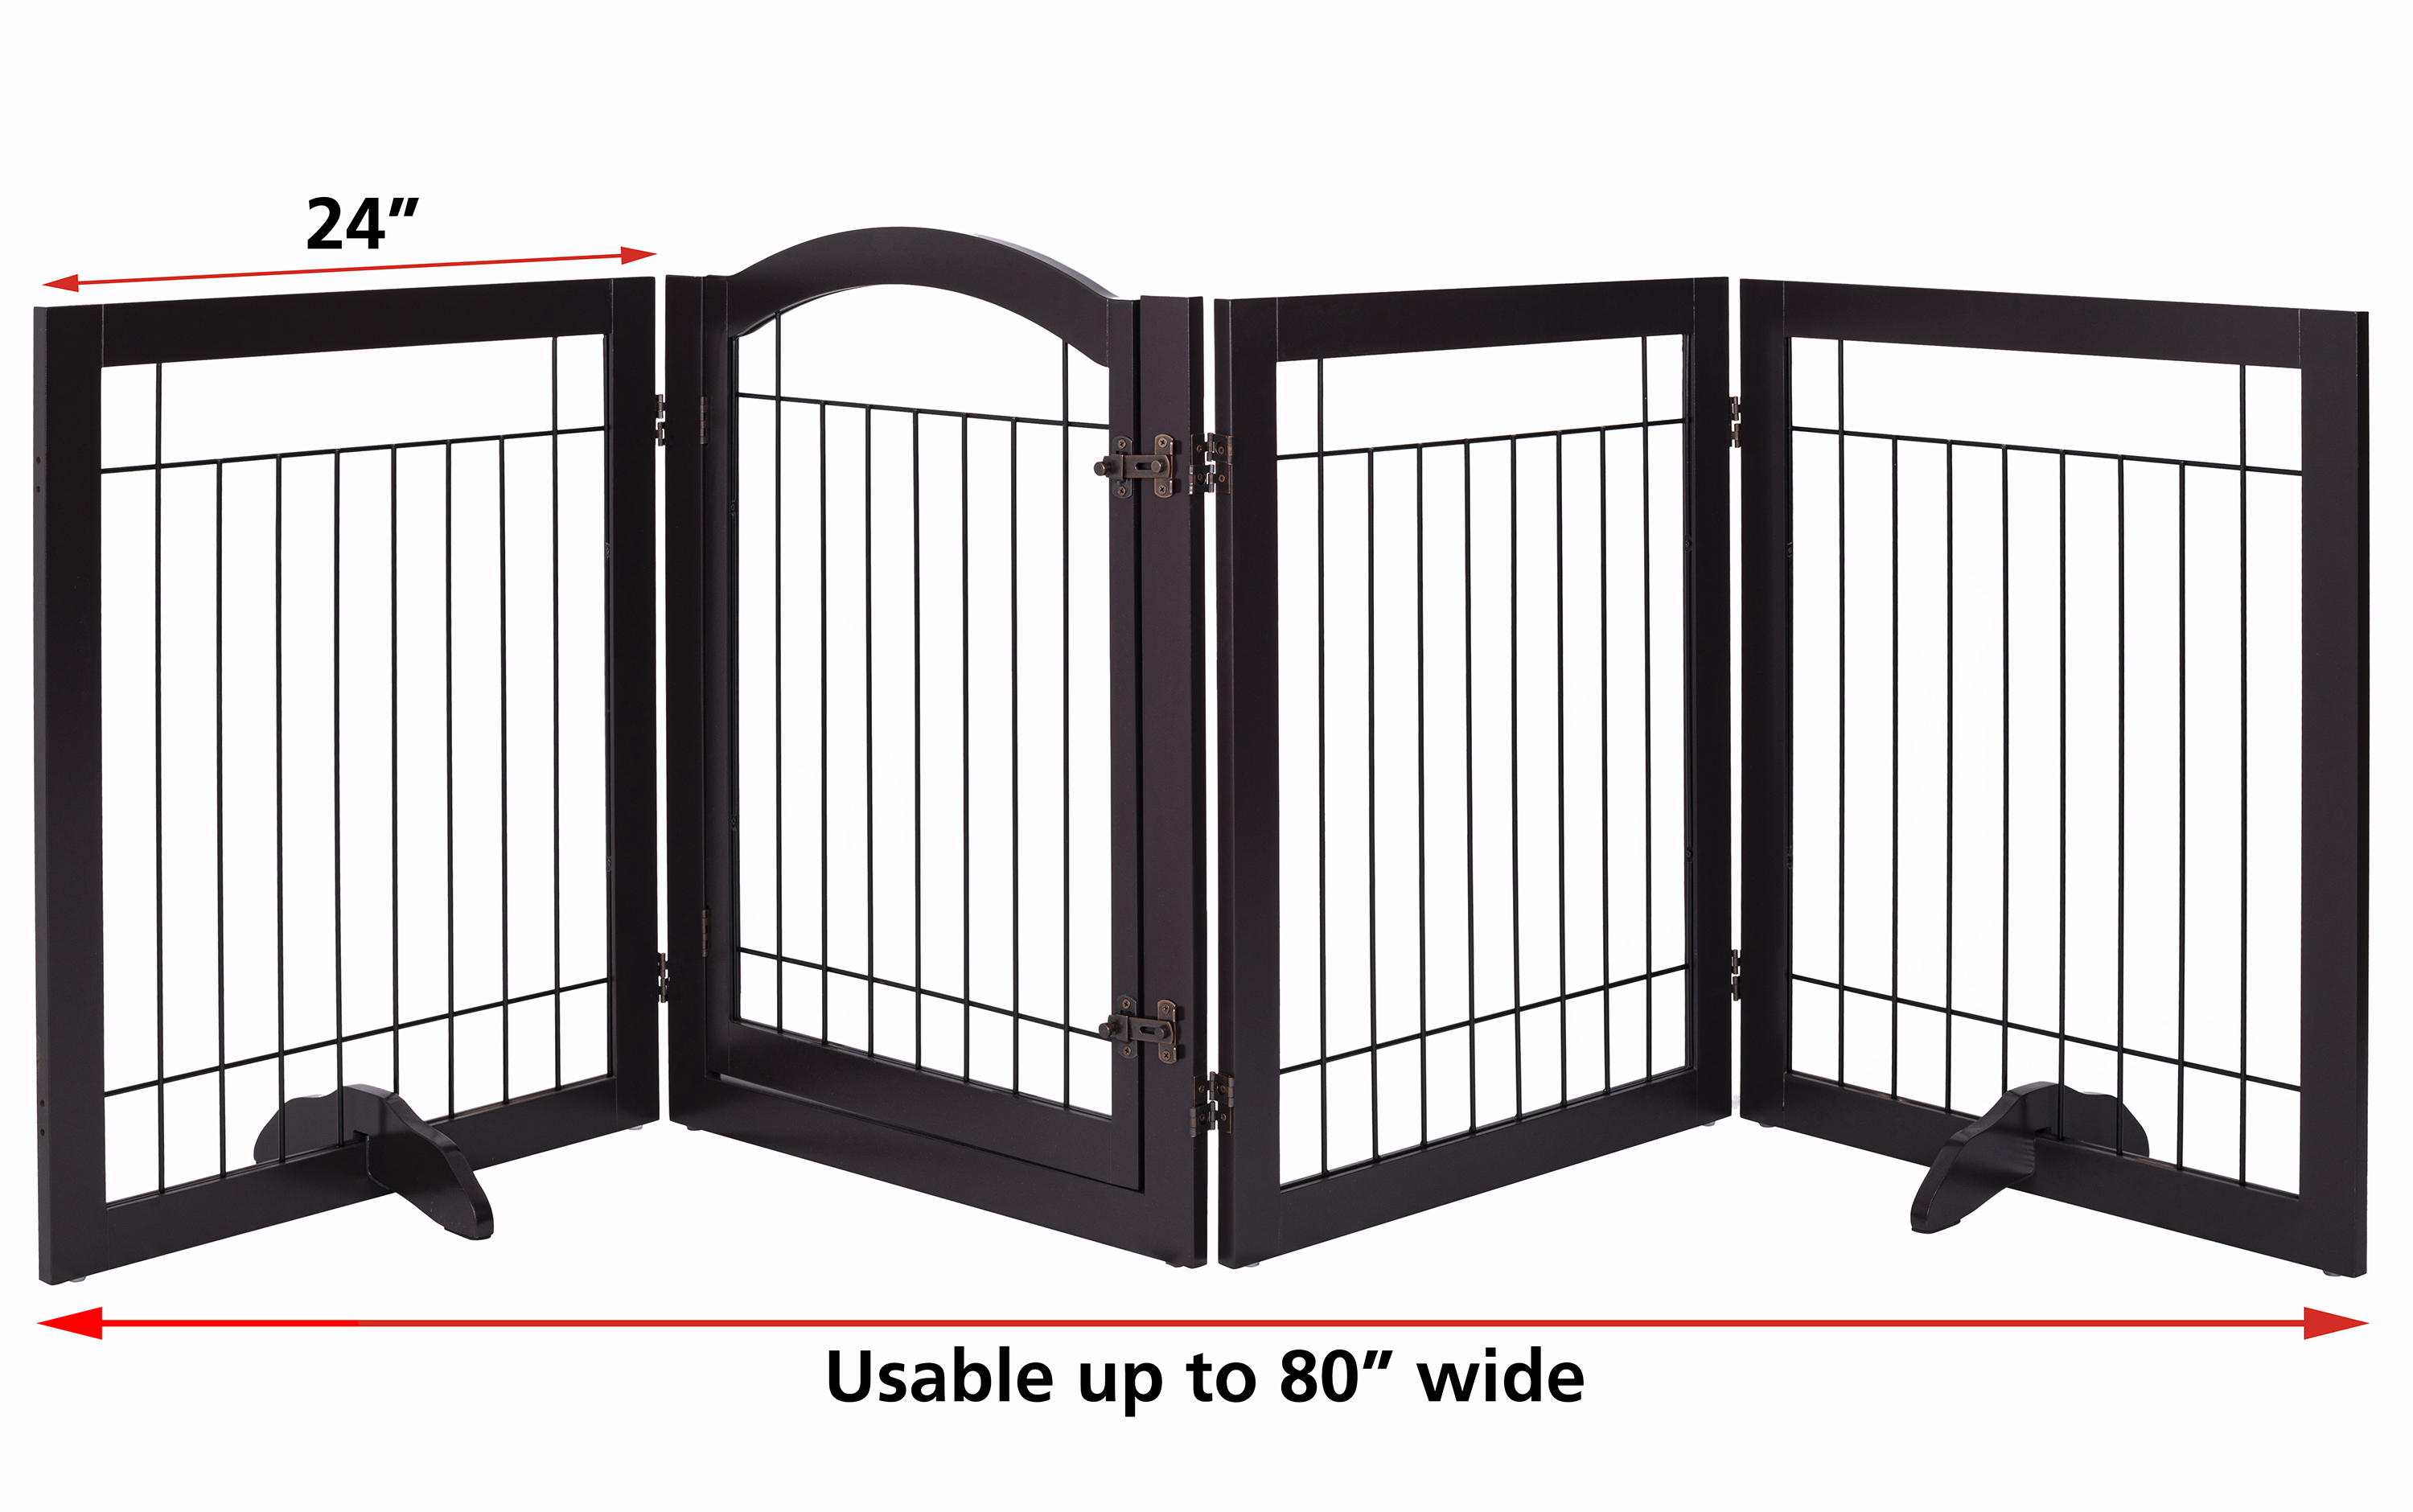 PAWLAND 96-inch Extra Wide 30-inches Tall Dog gate with Door Walk Through, Freestanding Wire Pet Gate for The House, Doorway, Stairs, Pet Puppy Safety Fence, Support Feet Included(Espresso) - image 5 of 6